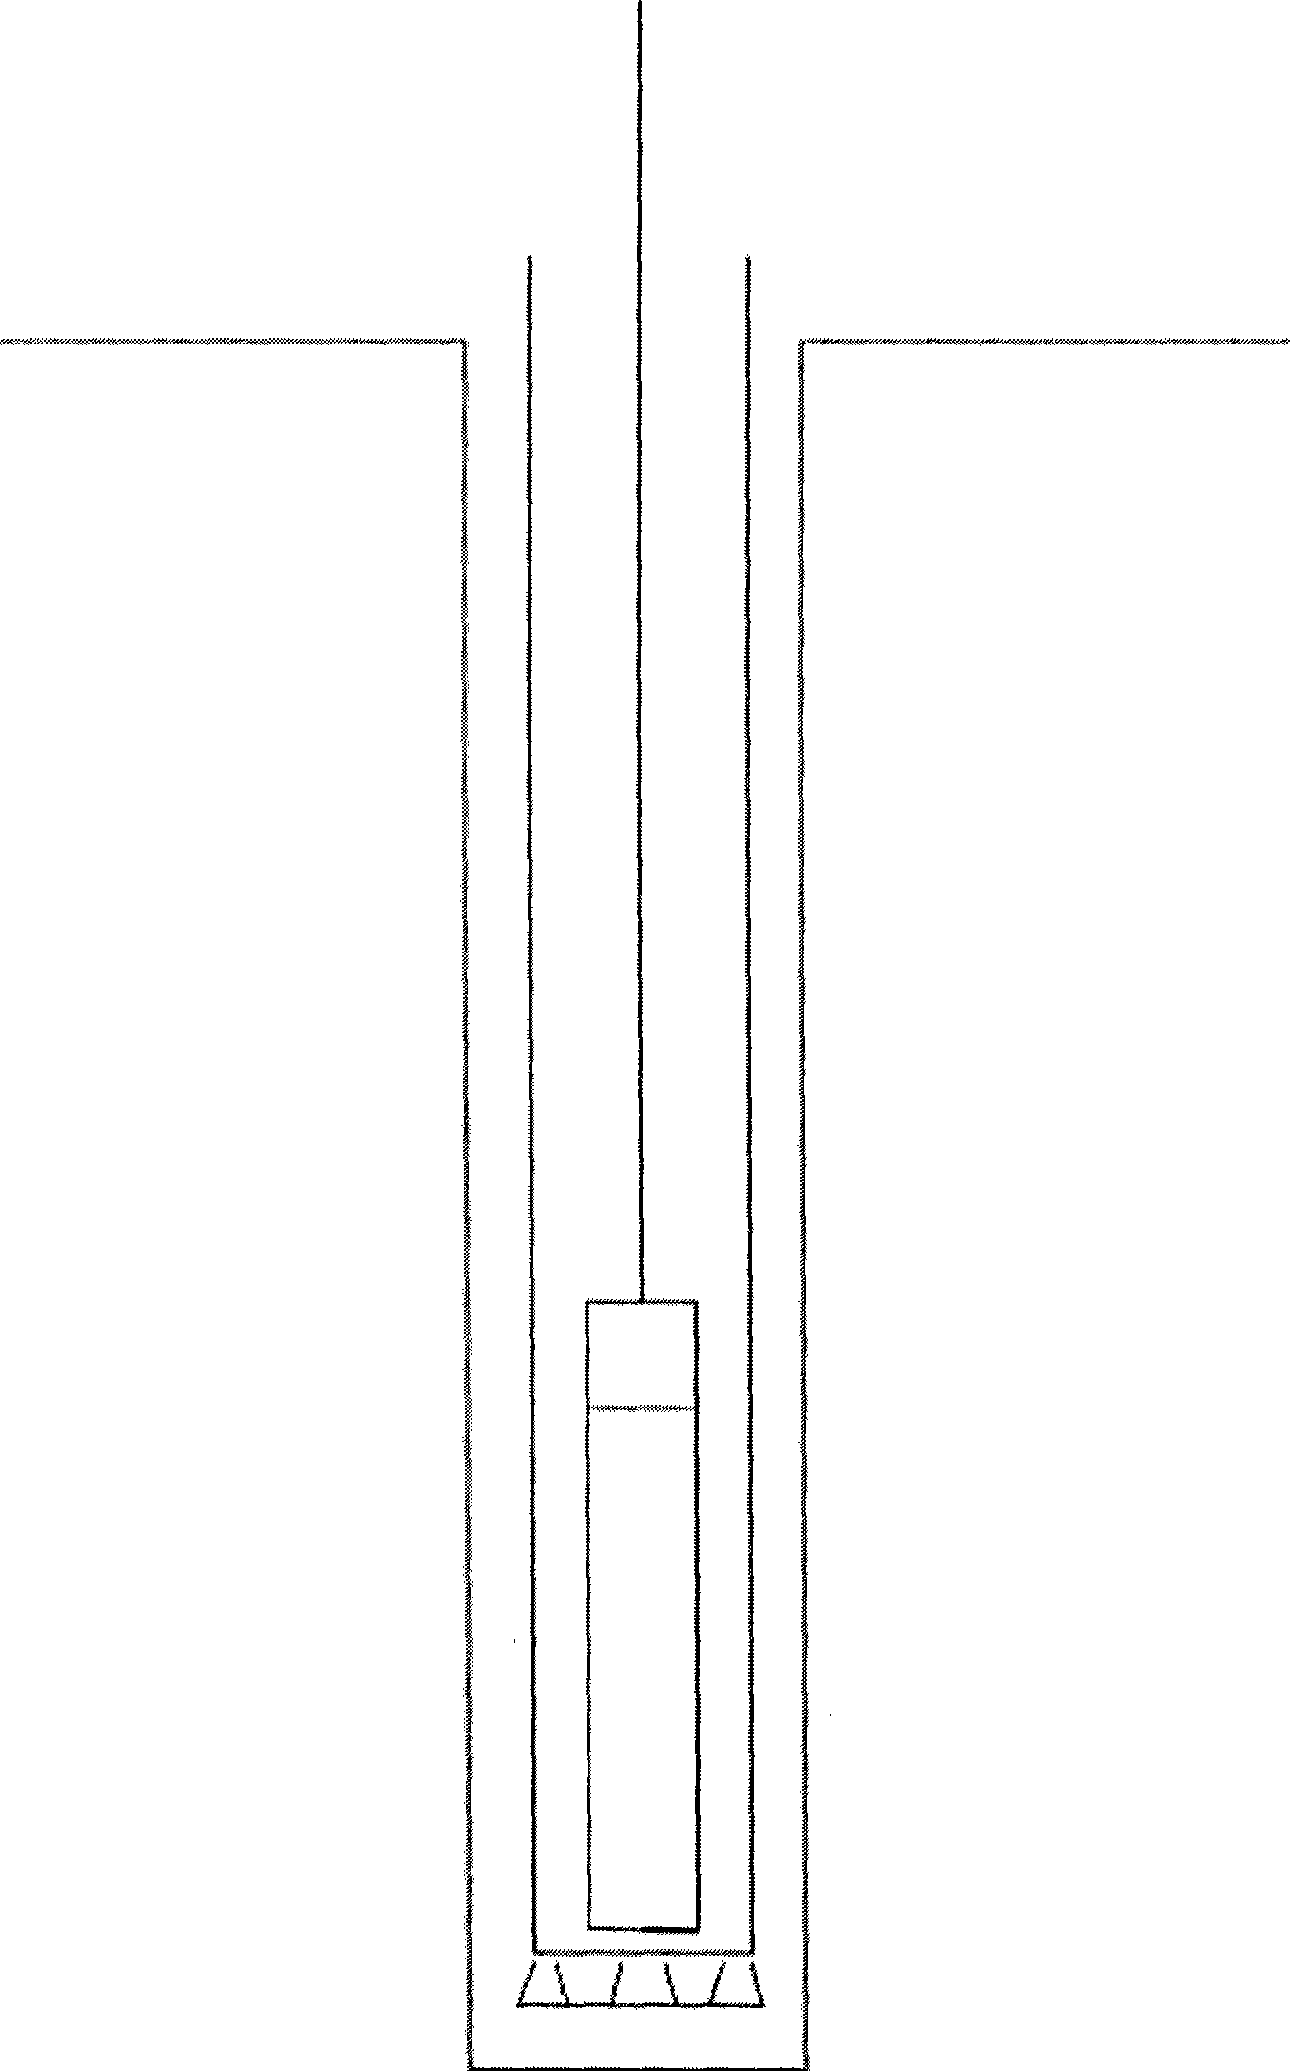 Multi-point oriented coring system and method for drill core